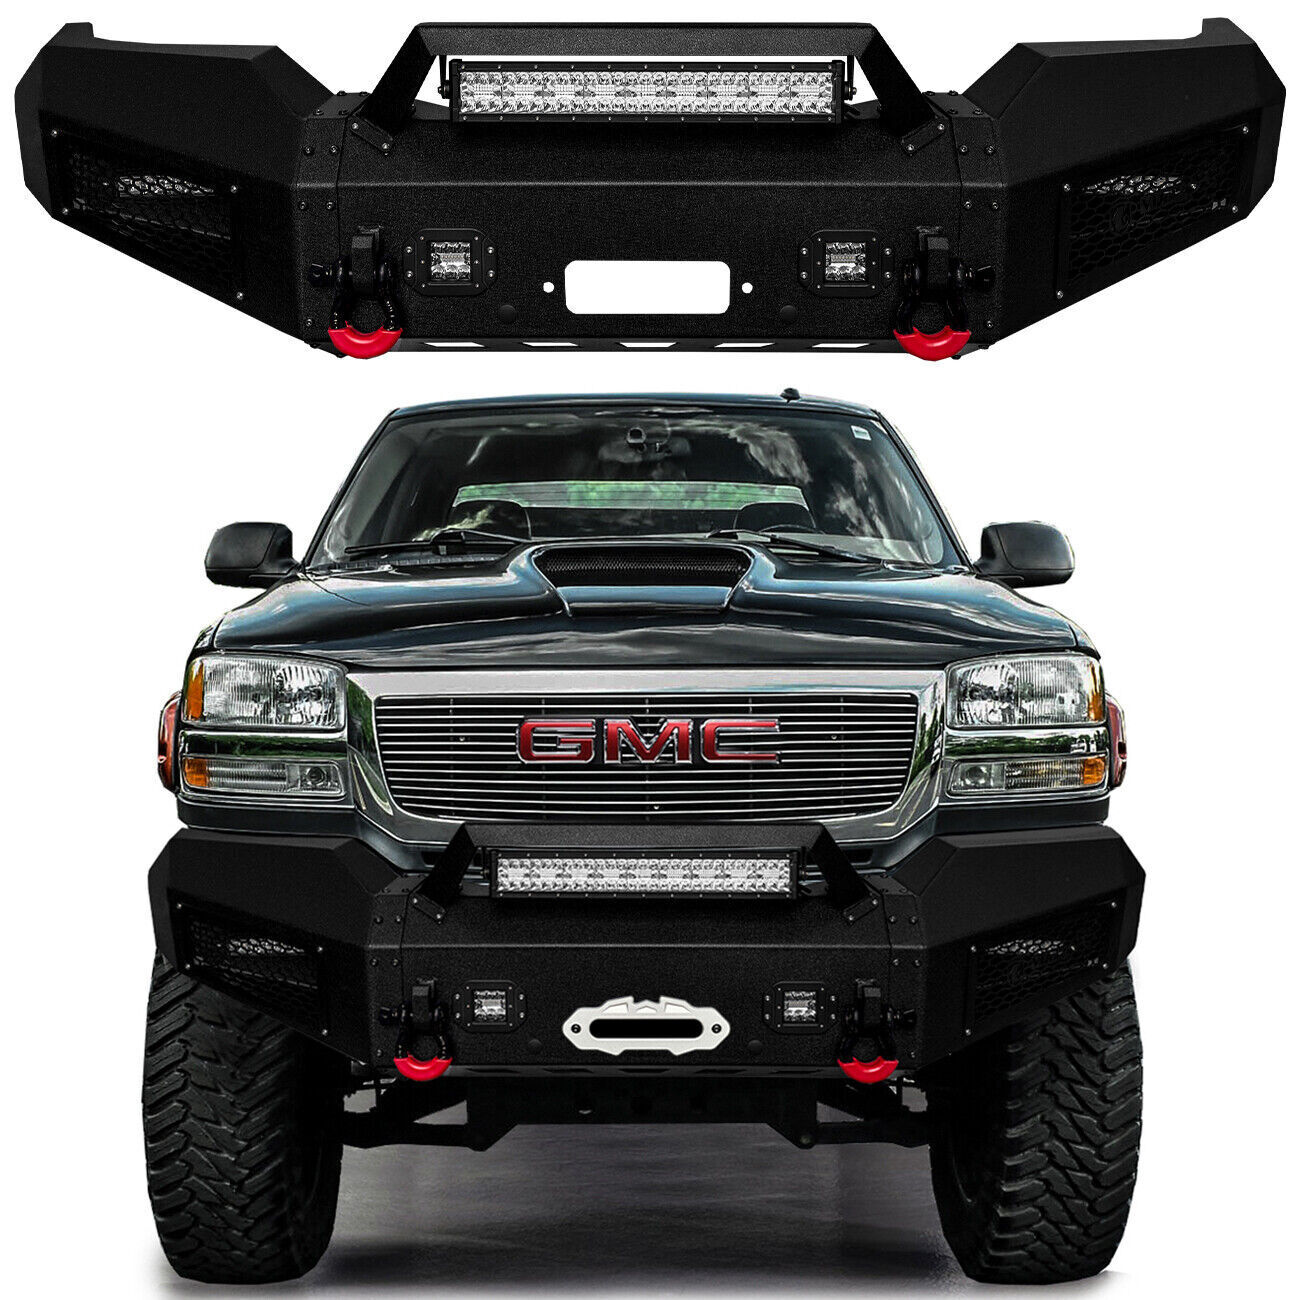 Vijay Fit 2003-2006 GMC Sierra 2500/3500 Front or Rear Bumper with LED Lights